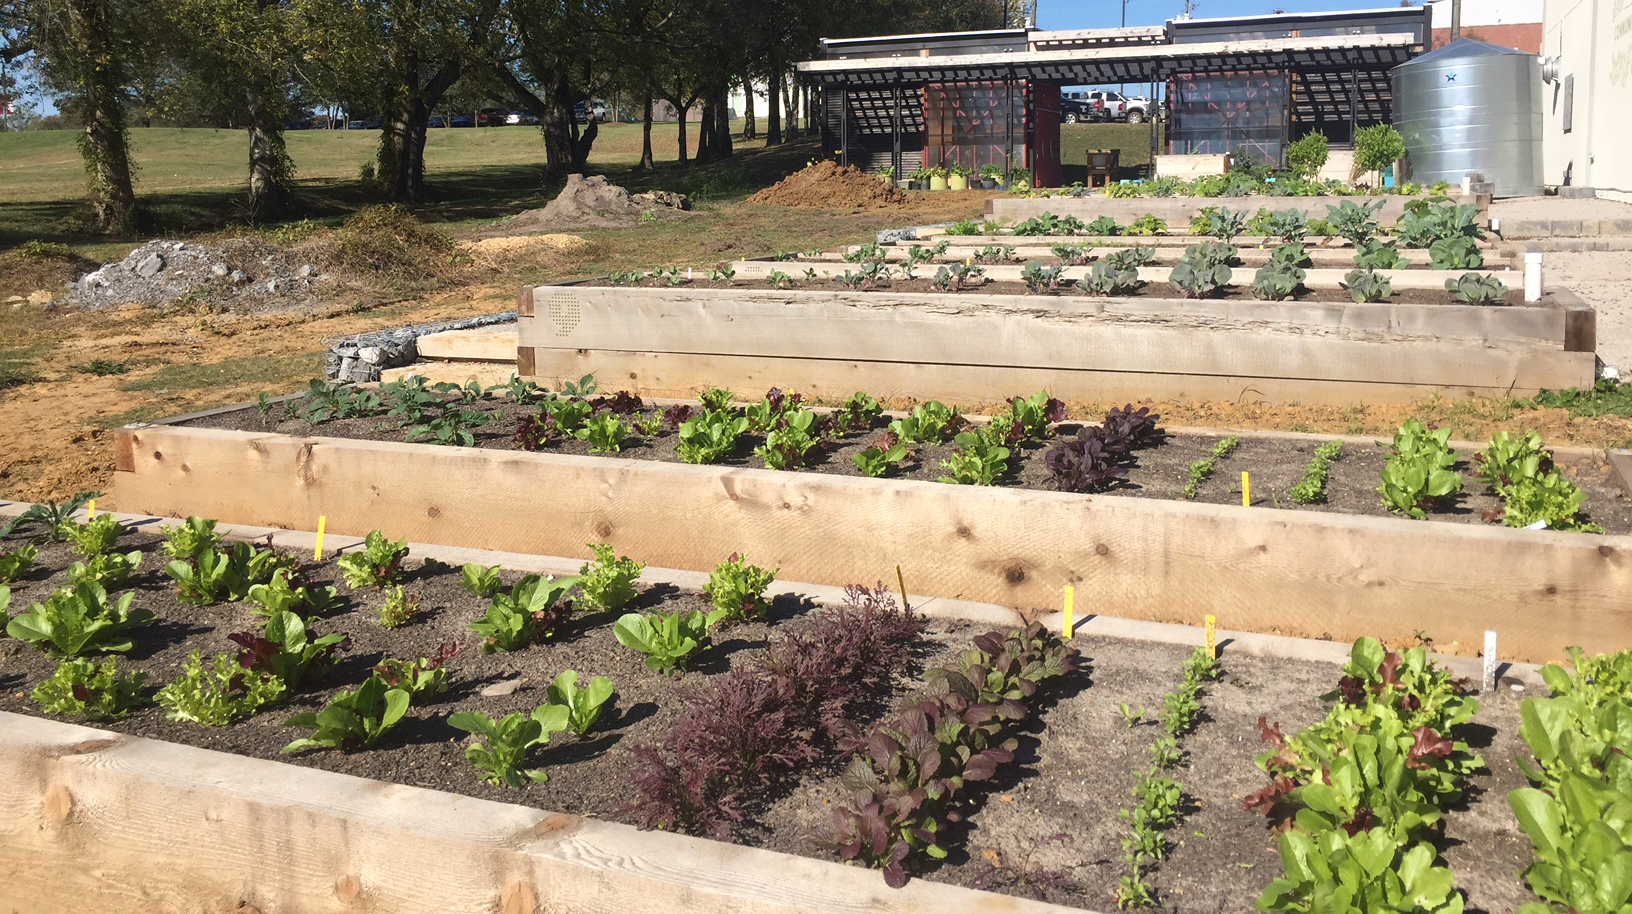 Wide shot shows MSU Community Garden with several raised garden beds planted with winter vegetables and lettuces. 